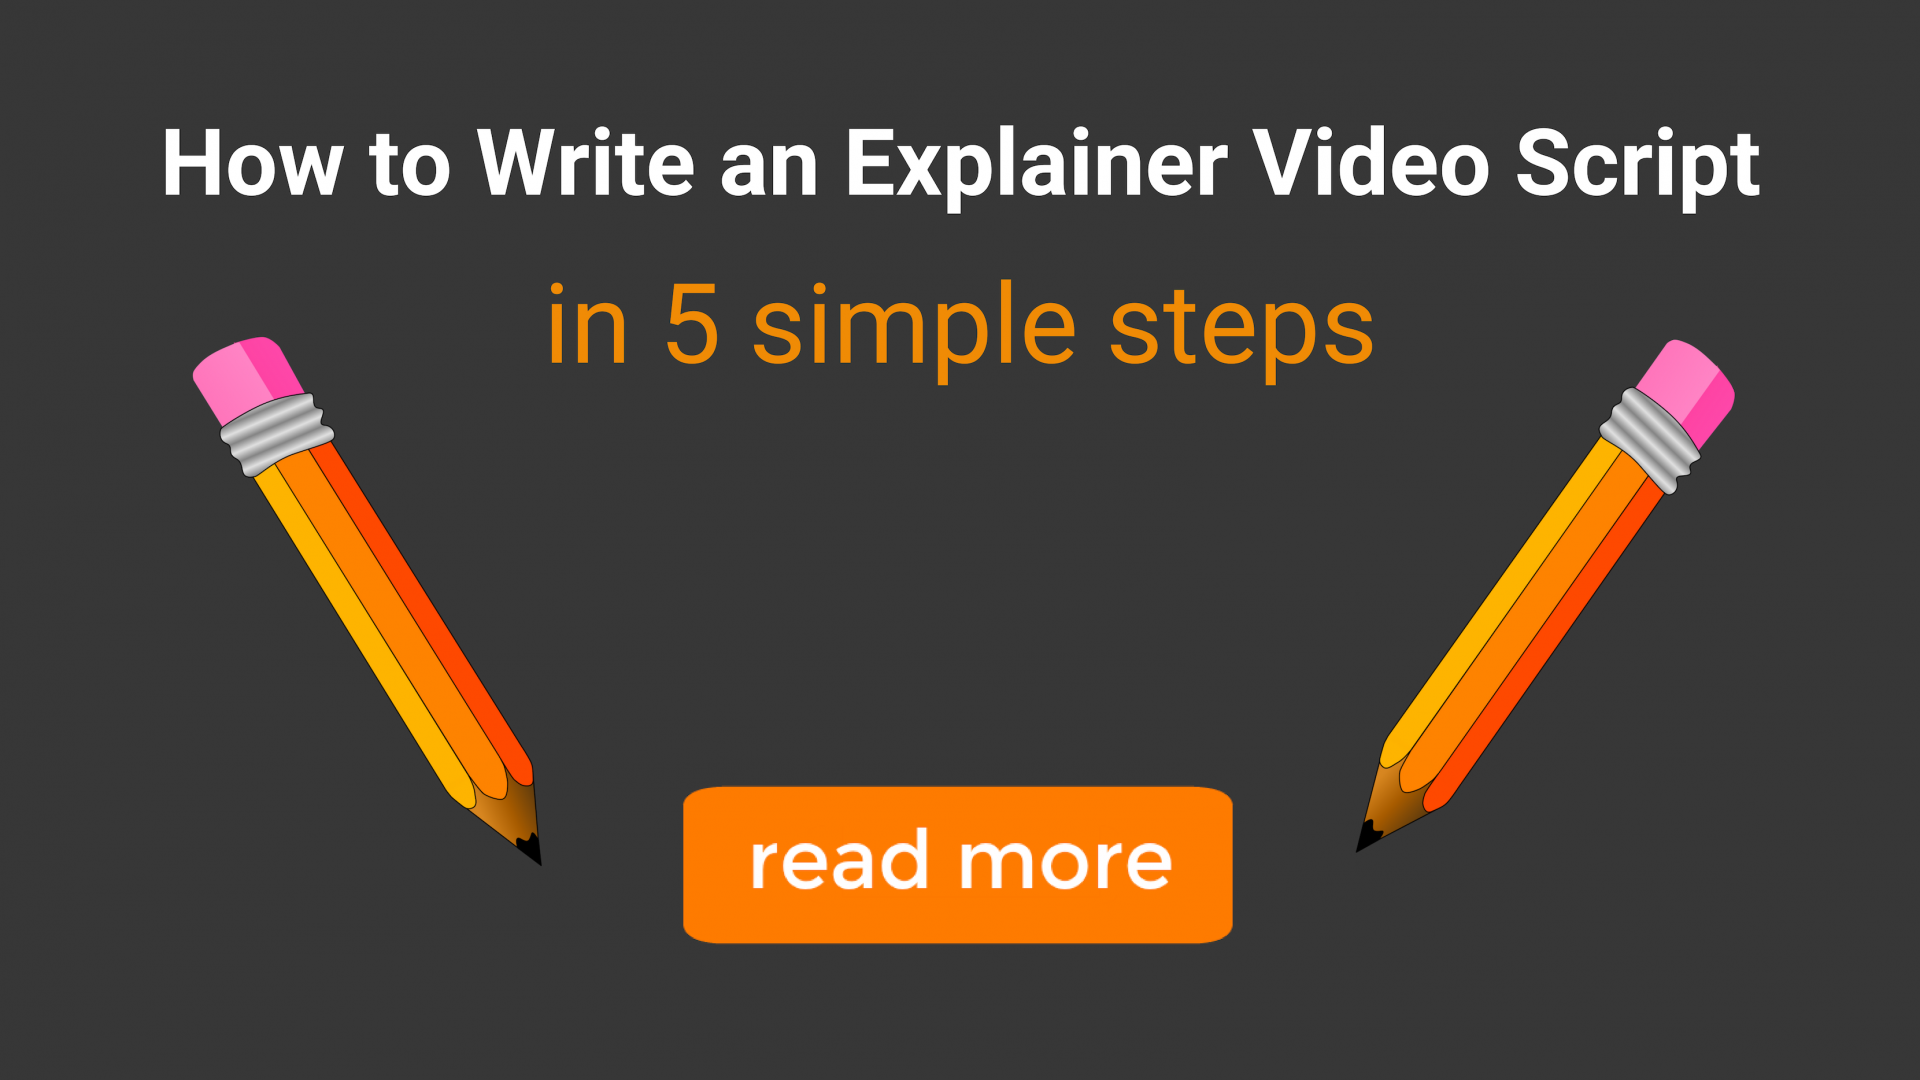 How to Write an Explainer Video Script: 15 Simple Steps - Promo